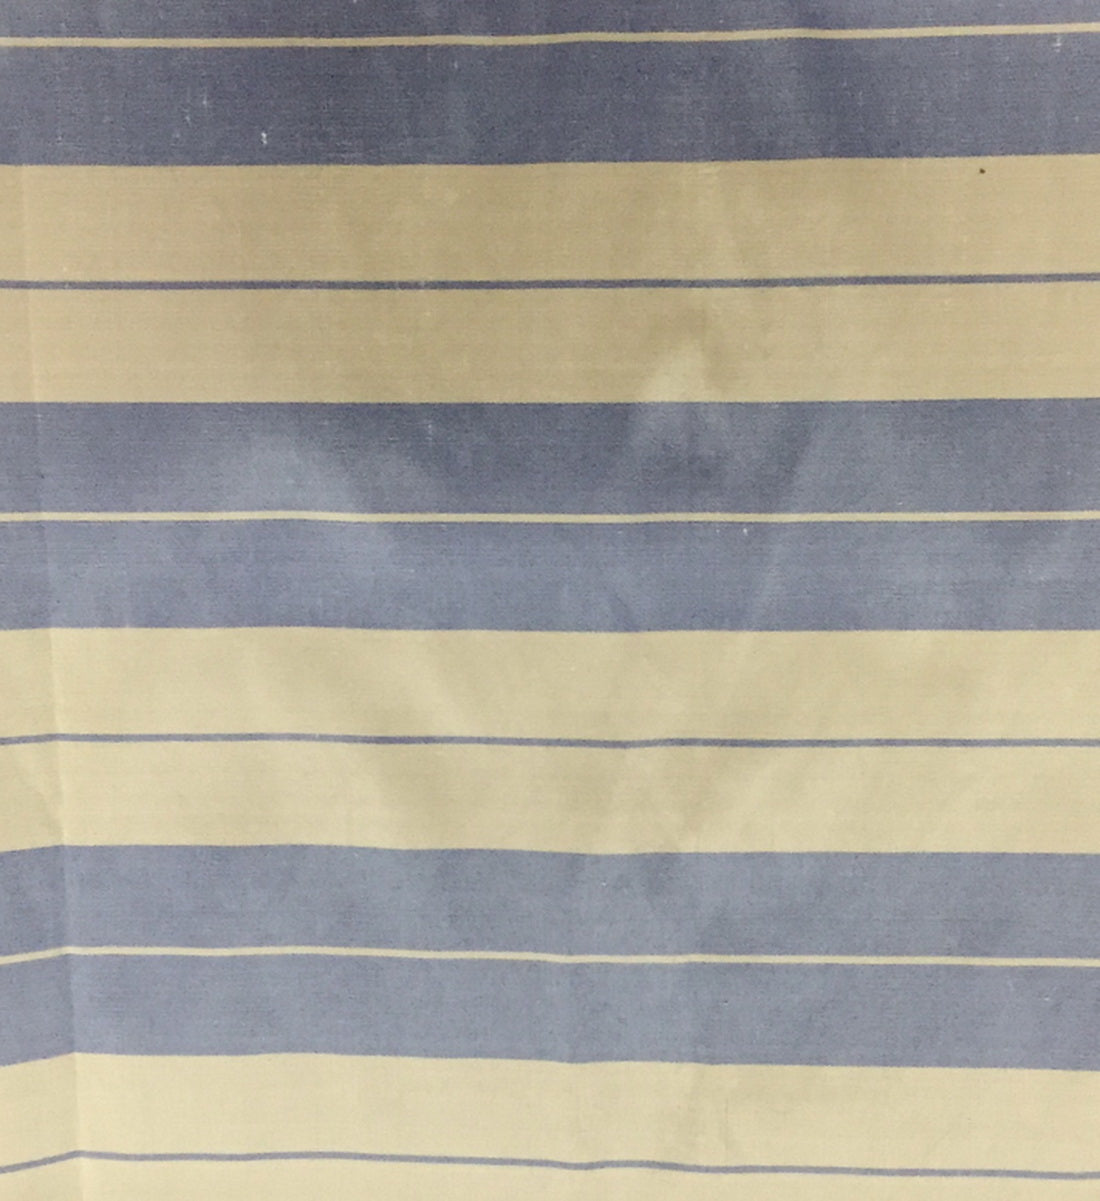 100% Pure Silk dupion cloudy blue and beige stripe Fabric 54" wide DUPS69[1]